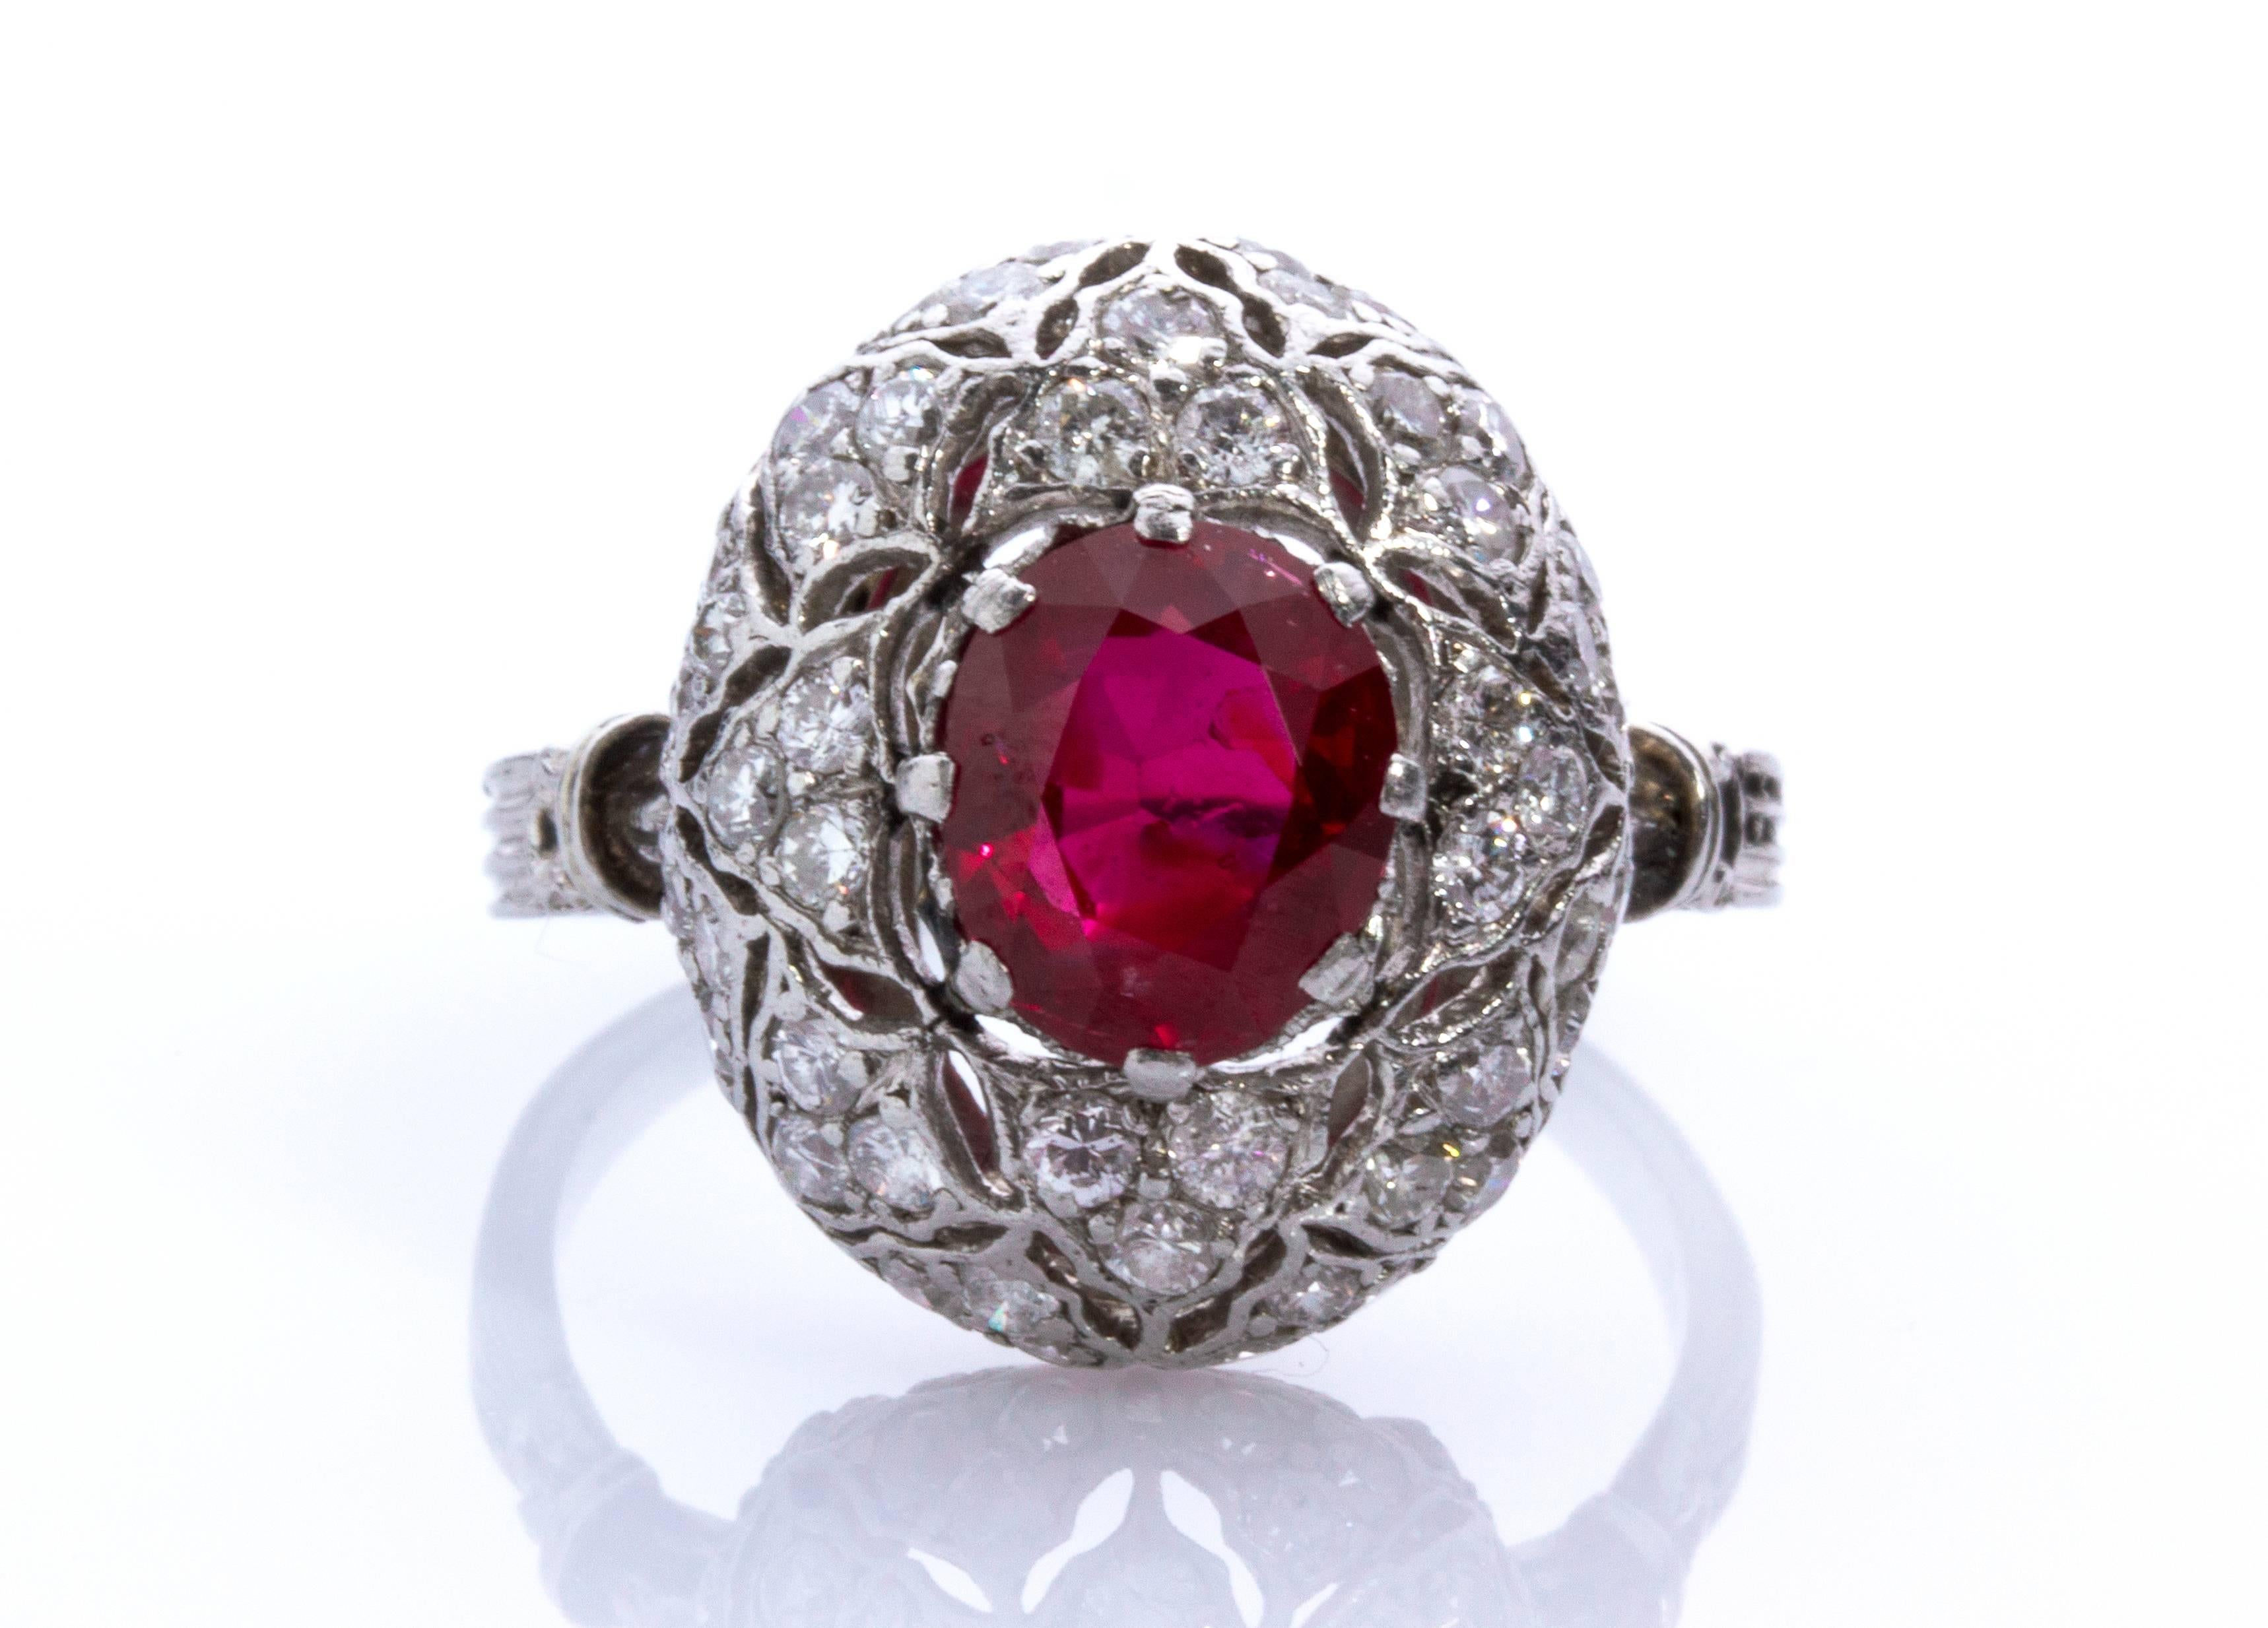 It features a rich red ruby weighing approx. 1.60 ct and high grade round brilliant cut diamonds, approx. 1.00 ct. The ring has the hallmarks of Mario Buccellati (M. Buccelalti  - b.1891, d.1965), an unusual ring made in platinum, in style of